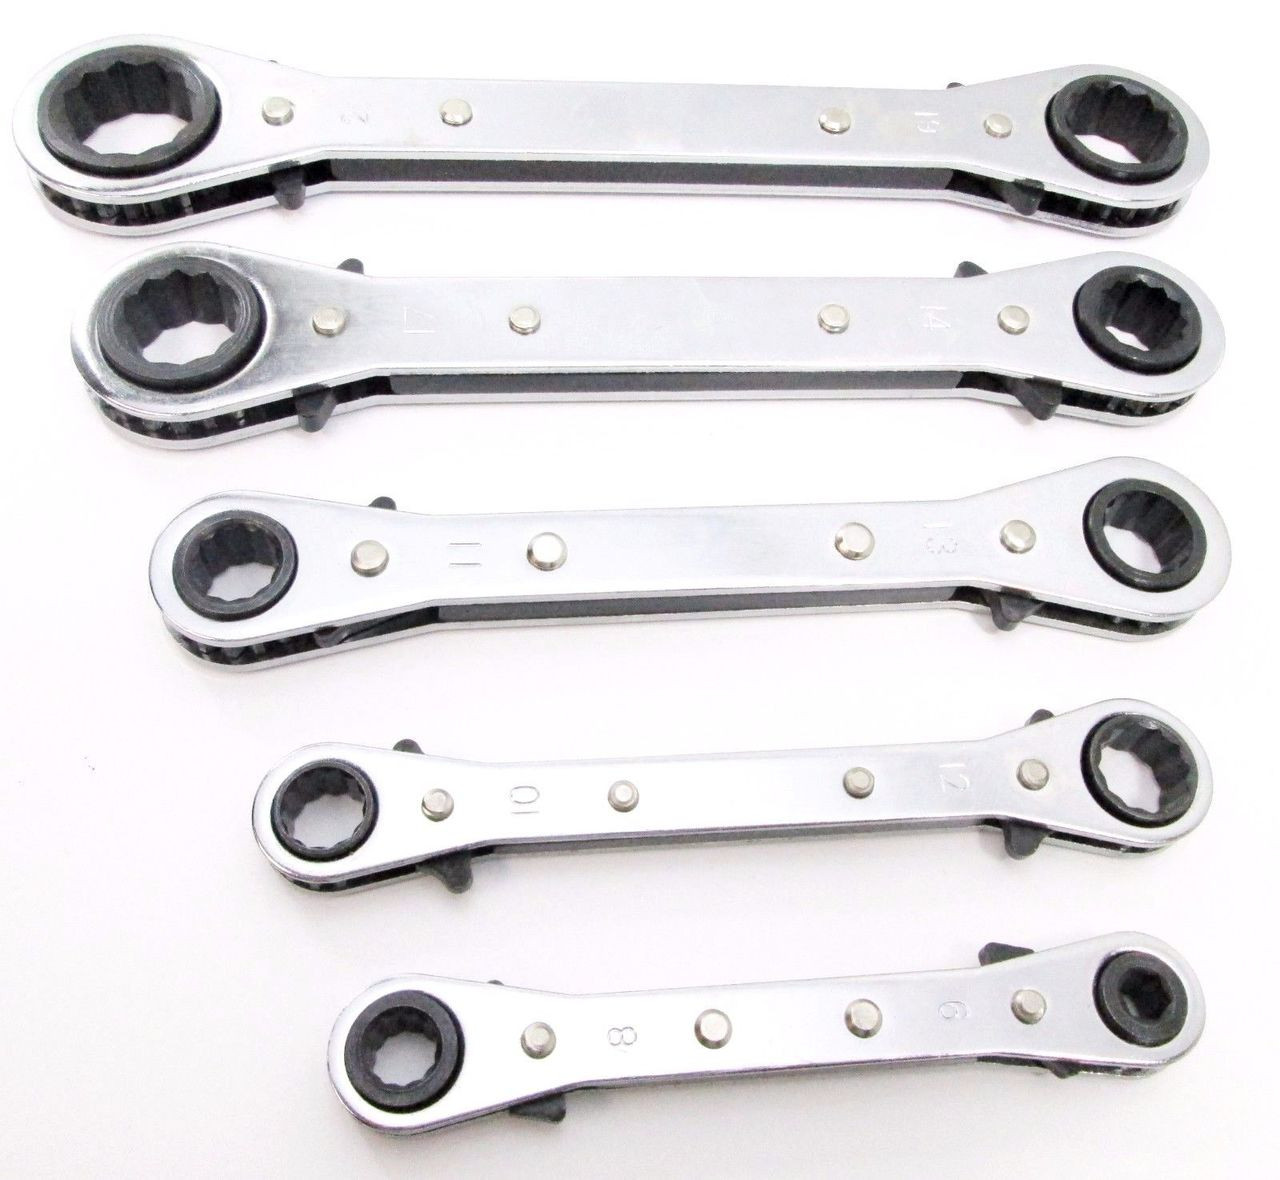 5pc Ratchet Spanner Set Metric Sizes Double Ring Wrench 6-21mm Reversible SP029 